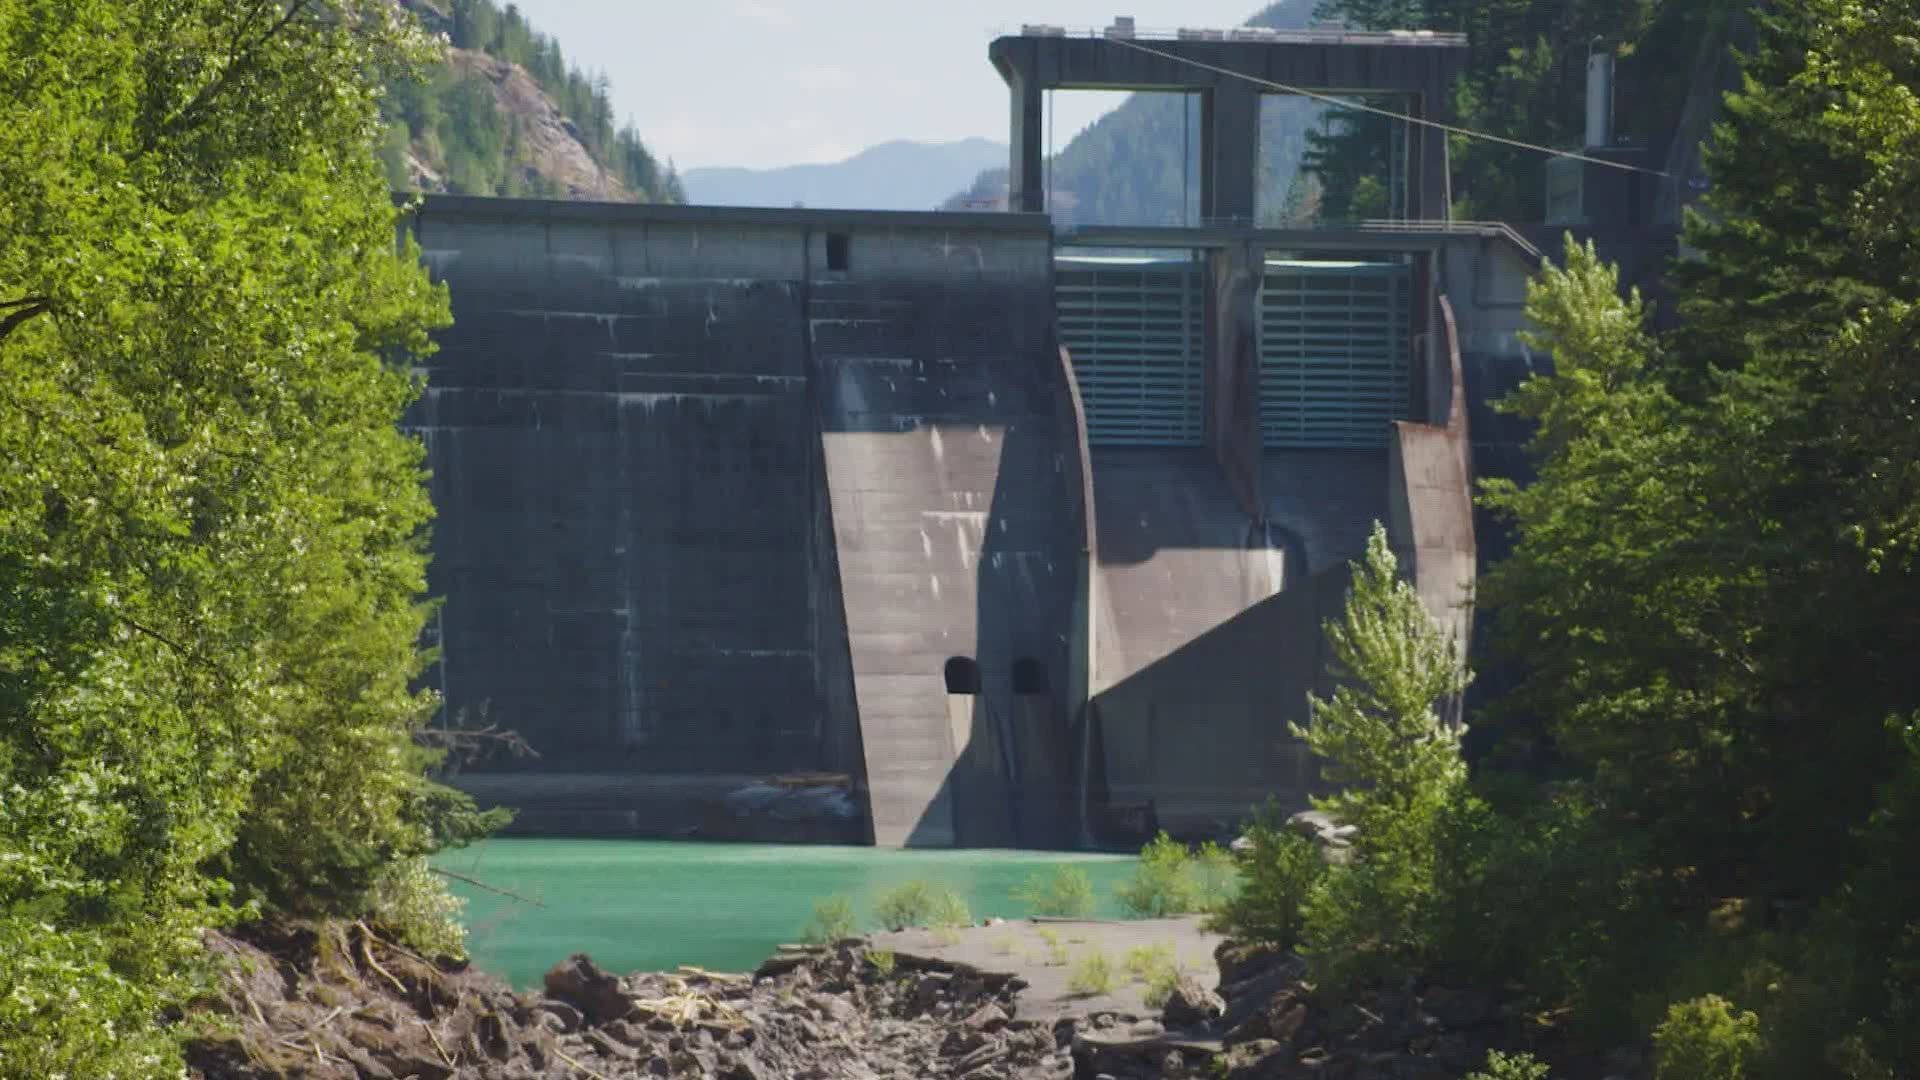 The Sauk-Suiattle Indian Tribe has filed a lawsuit against City Light, arguing their hydroelectric dams not only kill salmon, but violate state law.